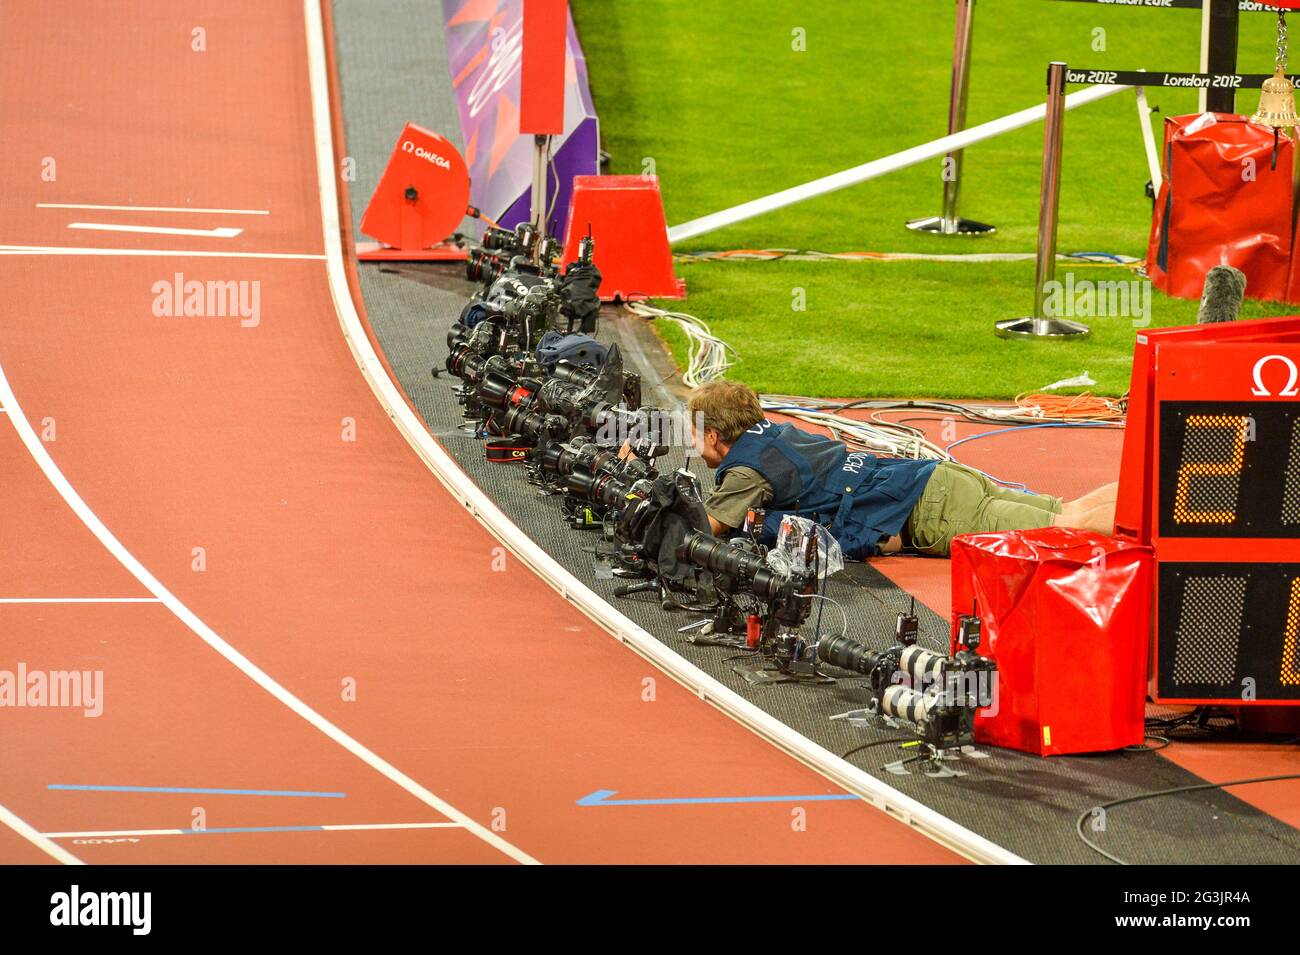 LONDON, ENGLAND - AUGUST 5, remote cameras during the evening session of athletics at the Olympic Stadium  on August 5, 2012 in London, England Photo by Roger Sedres / Gallo Images Stock Photo